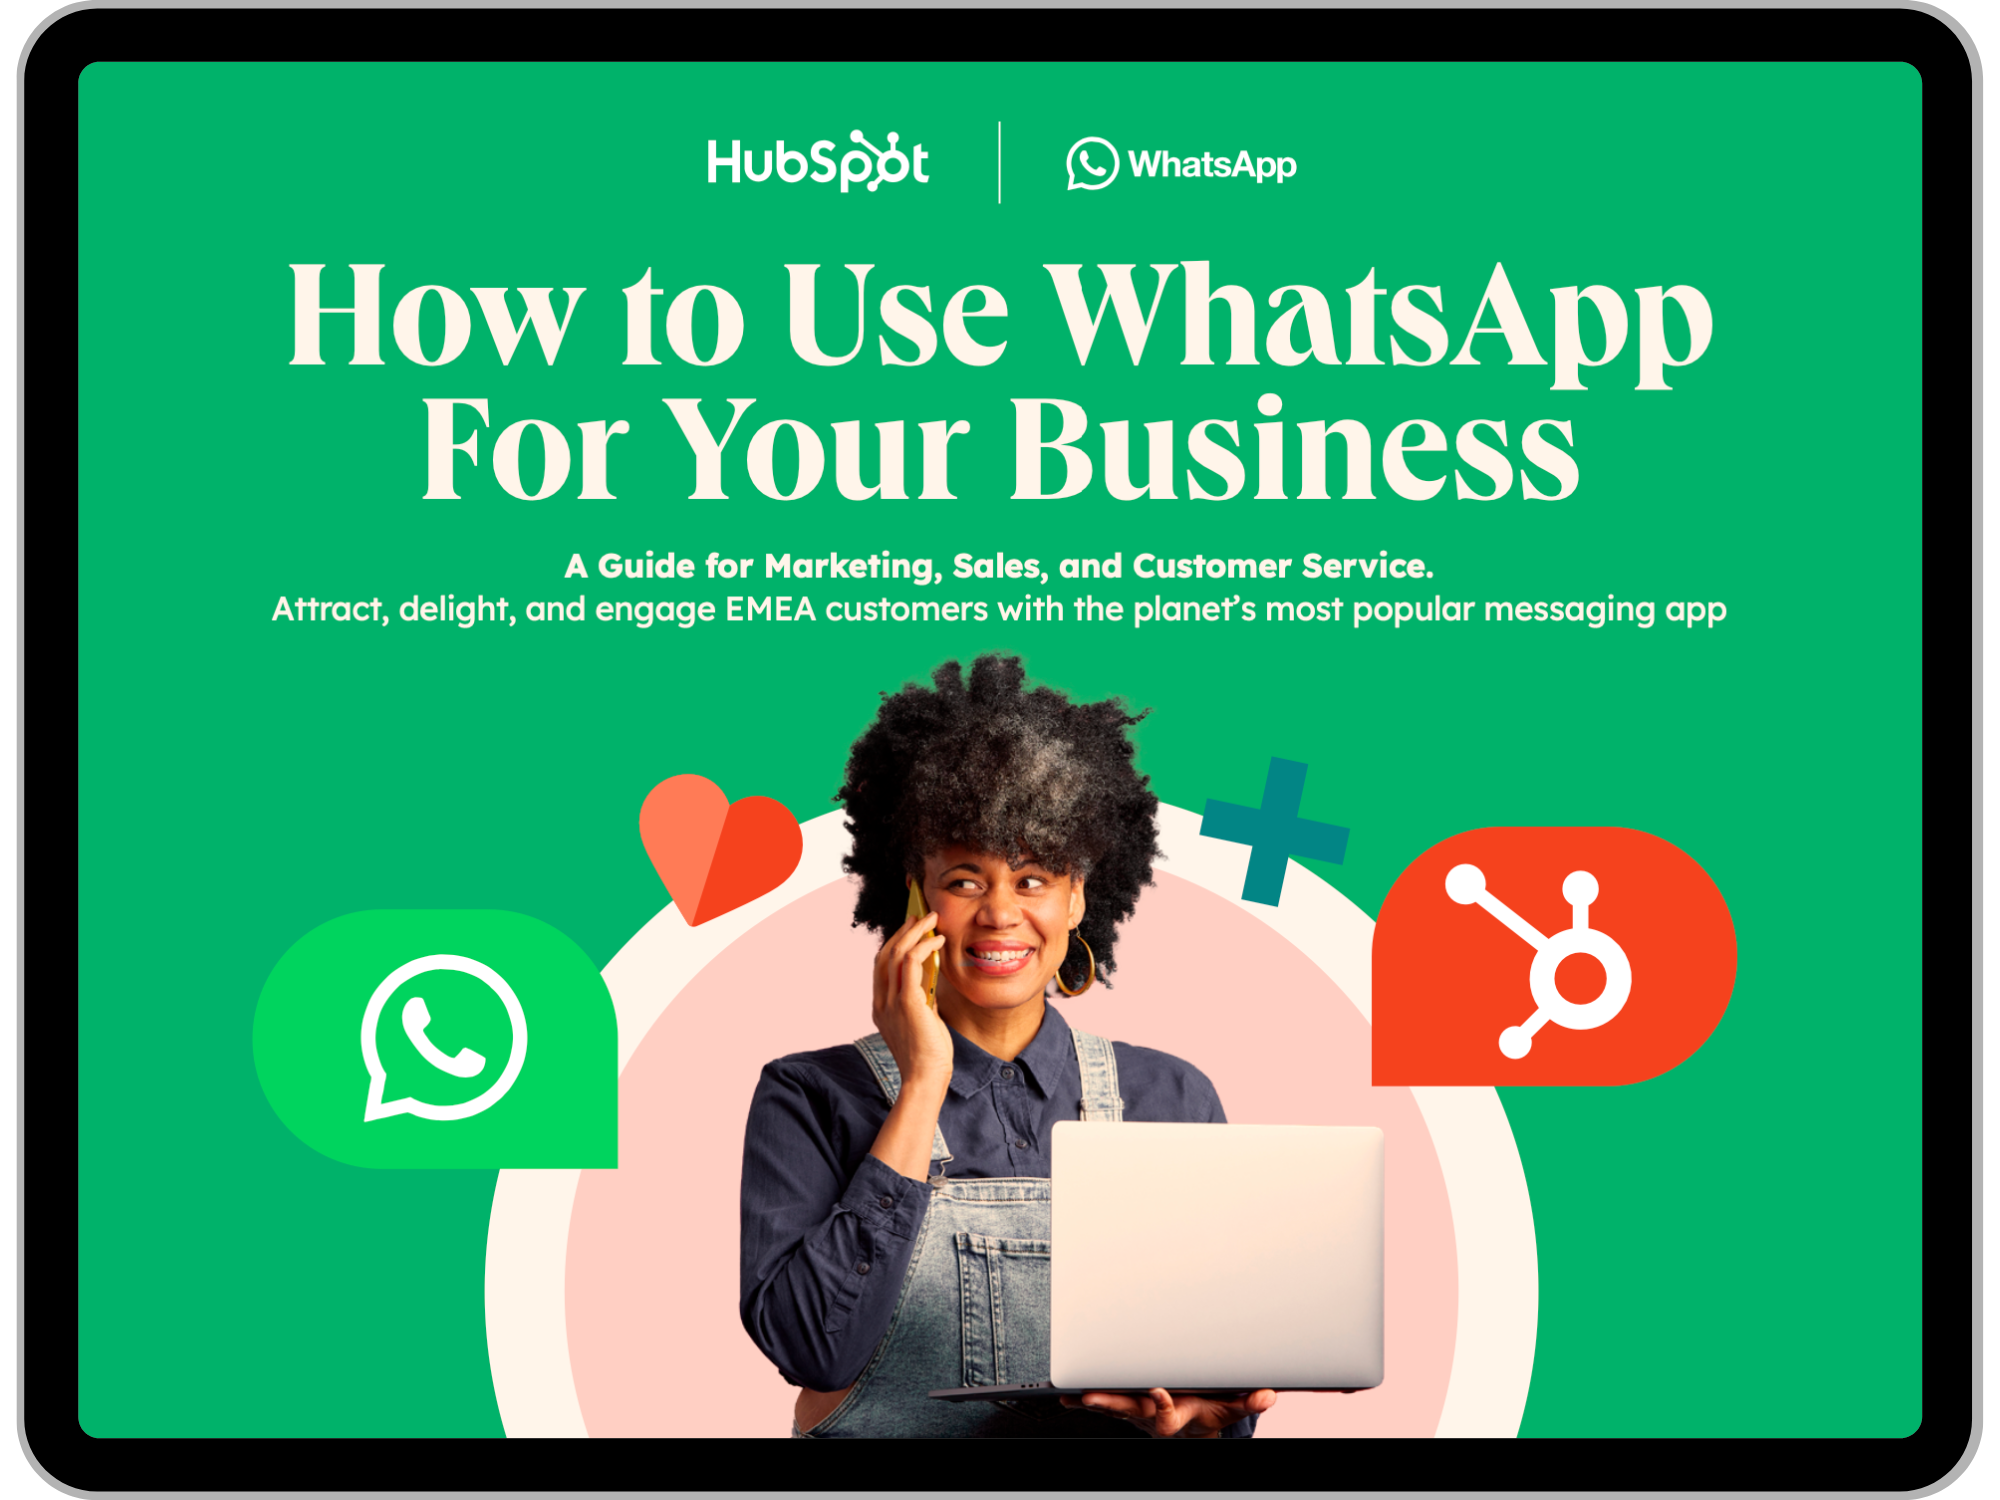 How to use WhatsApp for your business